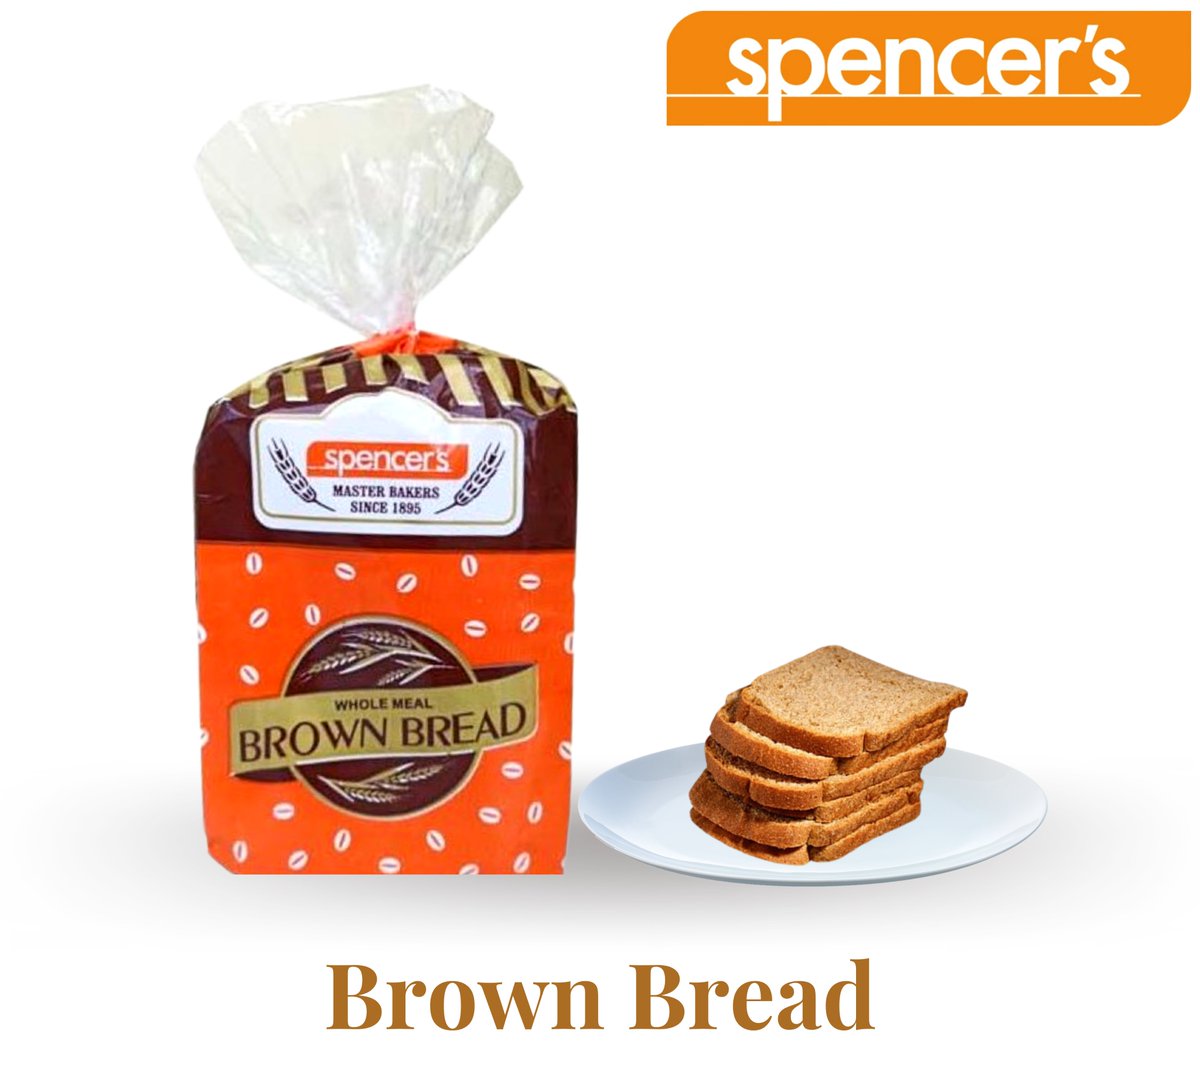 Spencer's Brown Bread is the perfect breakfast option for those looking for a healthy diet. Made from whole wheat flour, these are best to toast or to make sandwiches.
For bulk orders of spencer’s bread, 
contact us at 8093998404
#Spencer's #bread #brownbread #healthybread